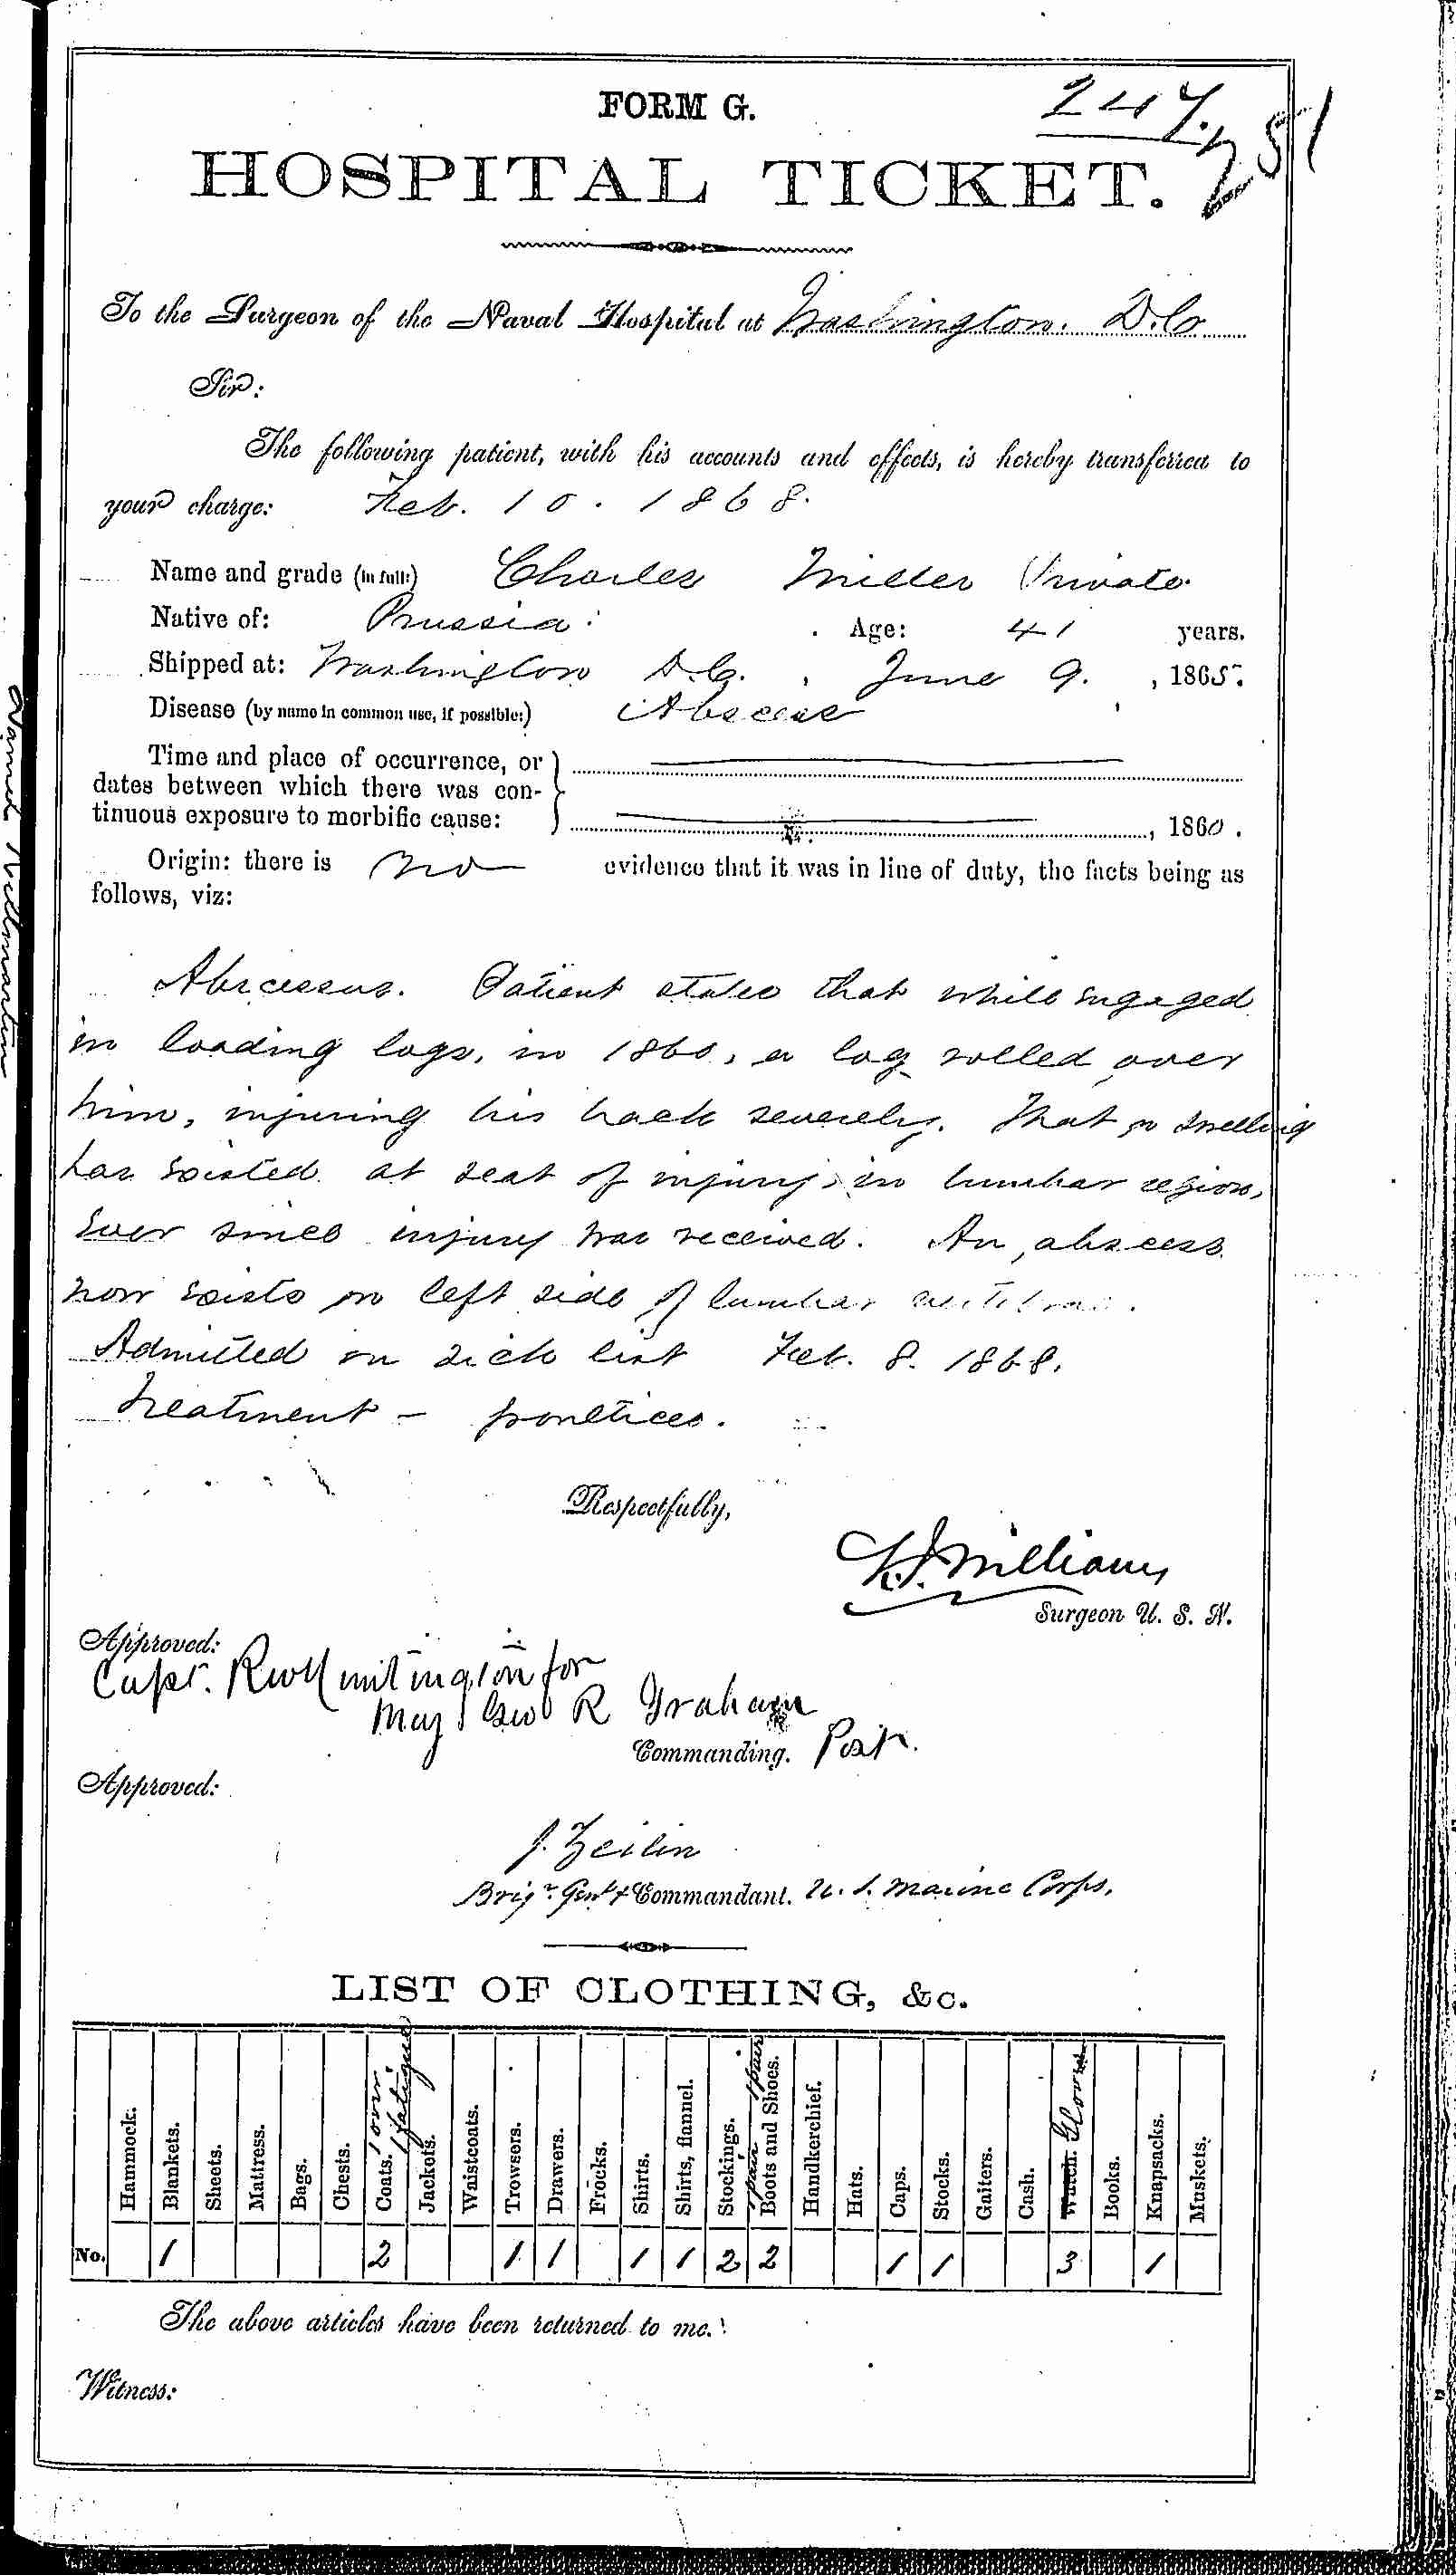 Entry for Charles Miller (page 1 of 2) in the log Hospital Tickets and Case Papers - Naval Hospital - Washington, D.C. - 1866-68